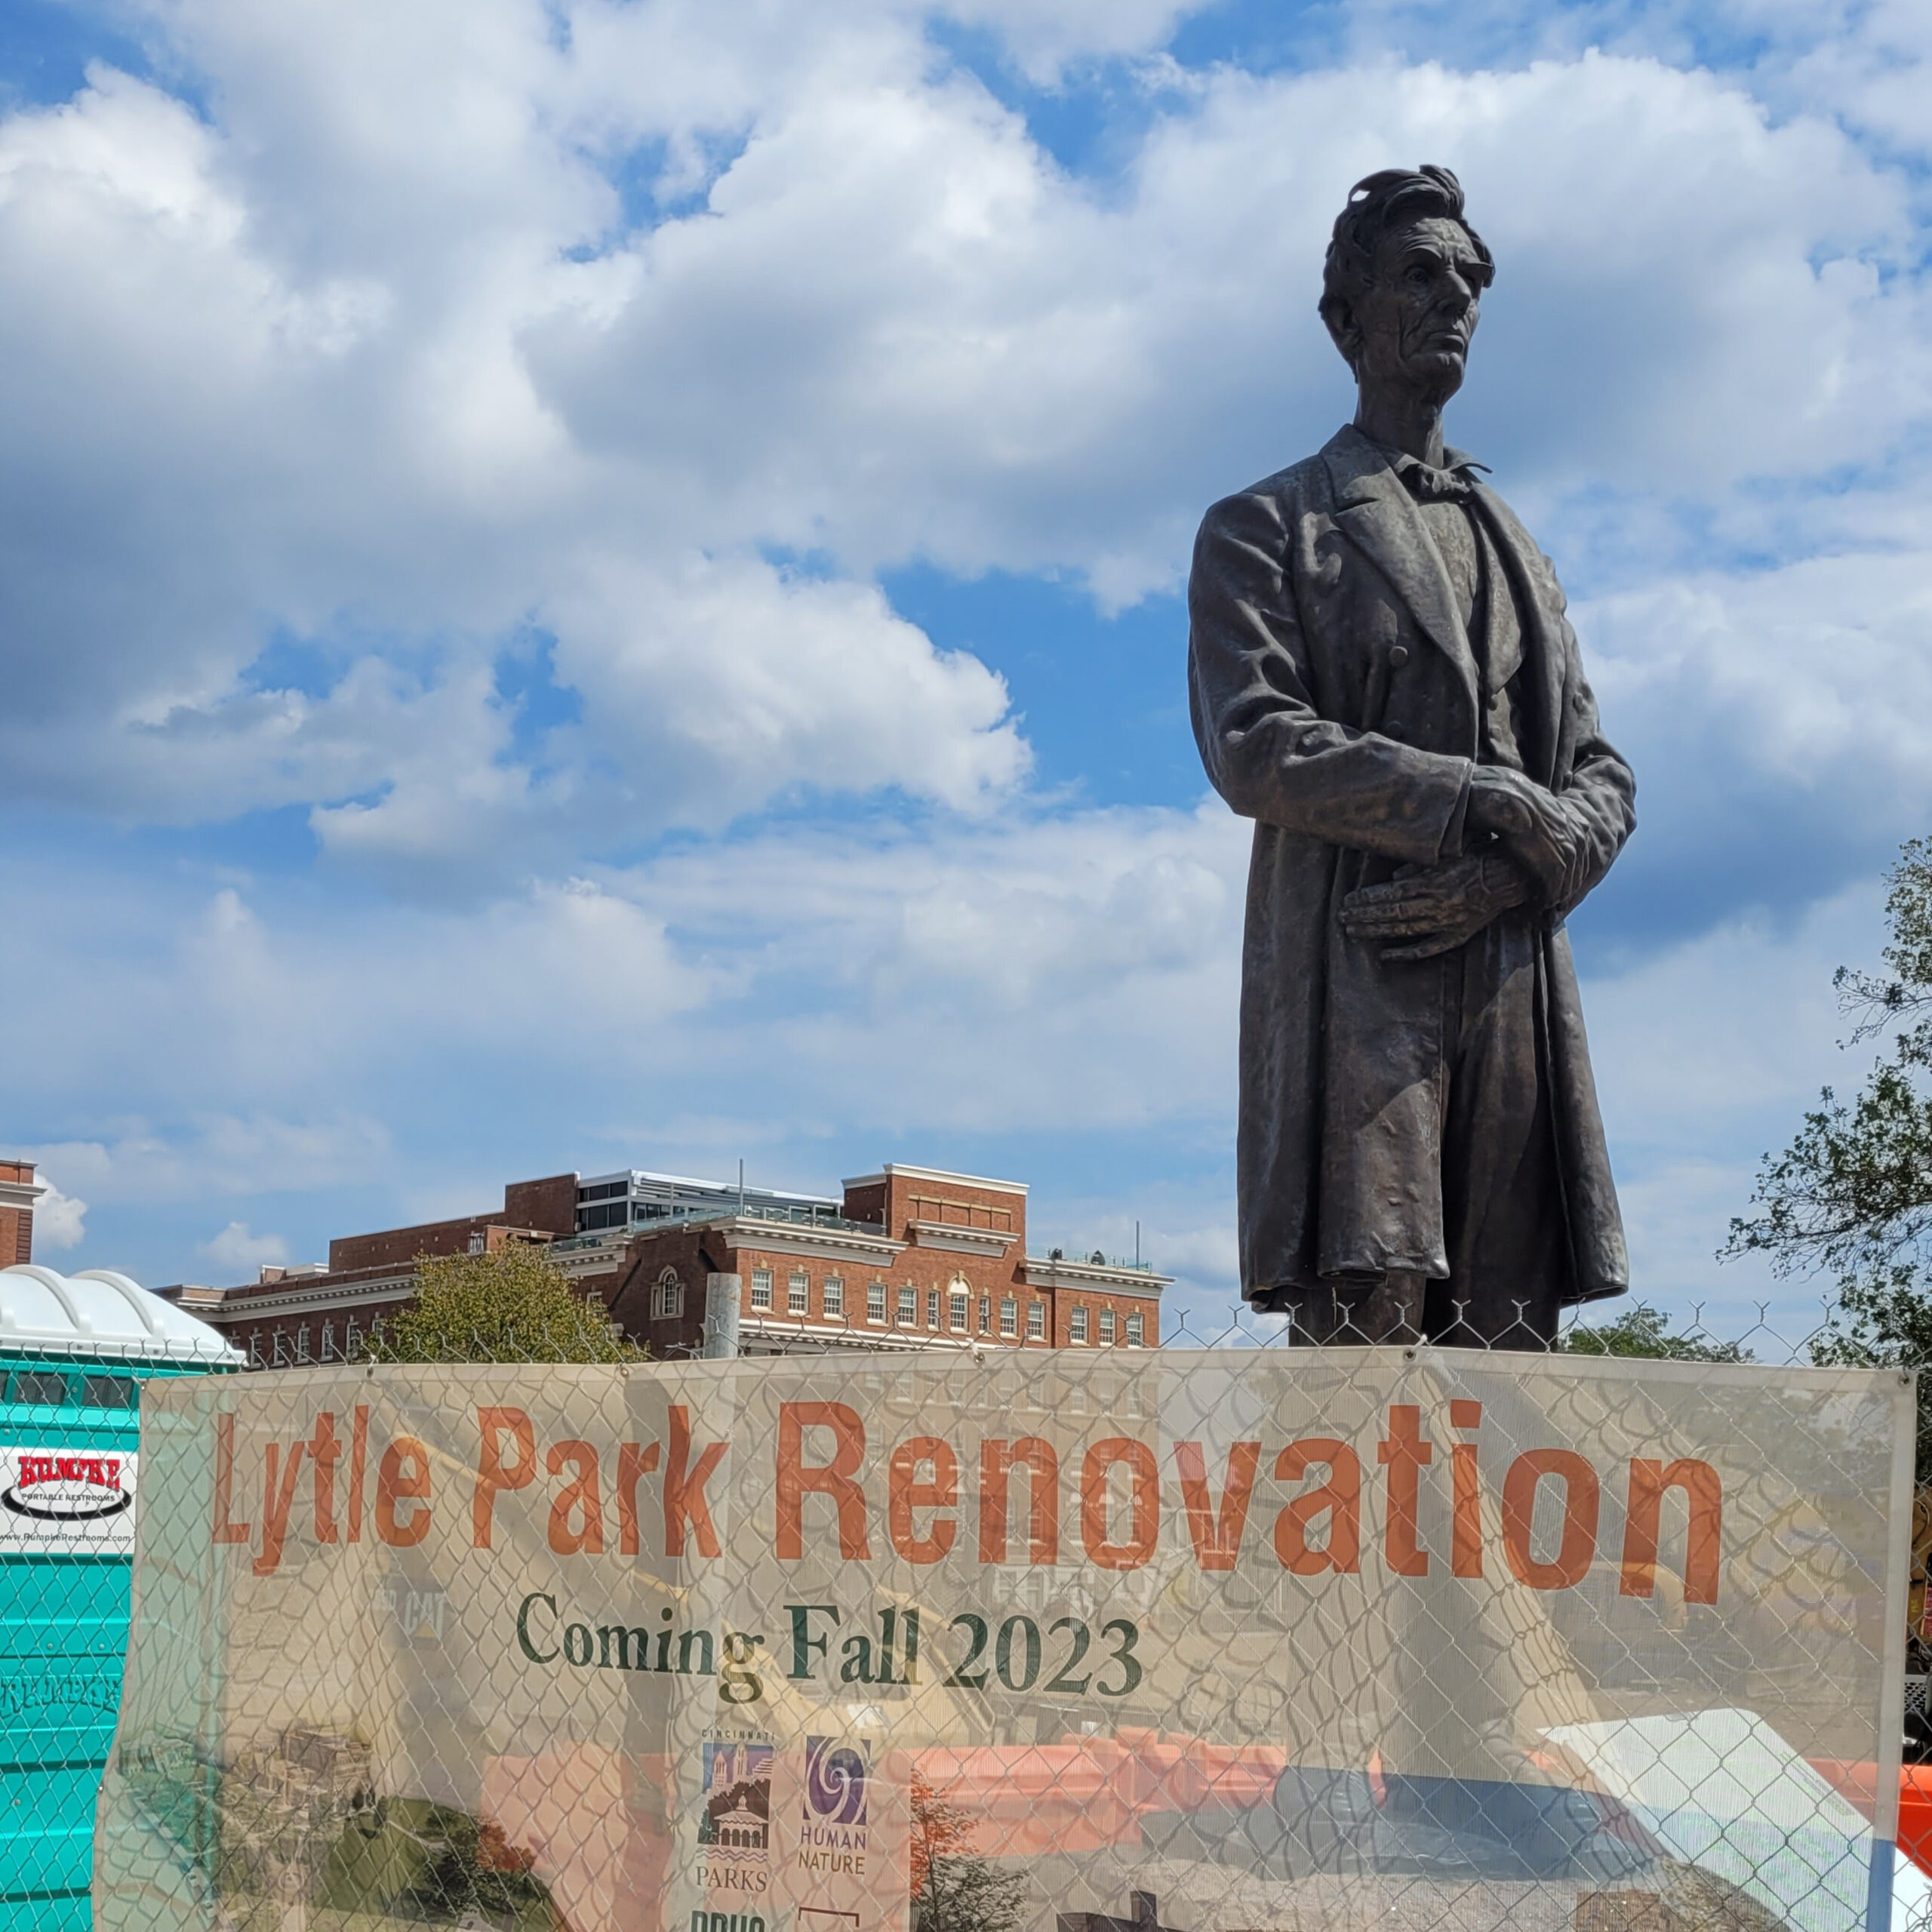 The majority of a statue of Abraham Lincoln is visible above a chain link fence with a sign reading "Lytle Park Renovation: Coming Fall 2023"